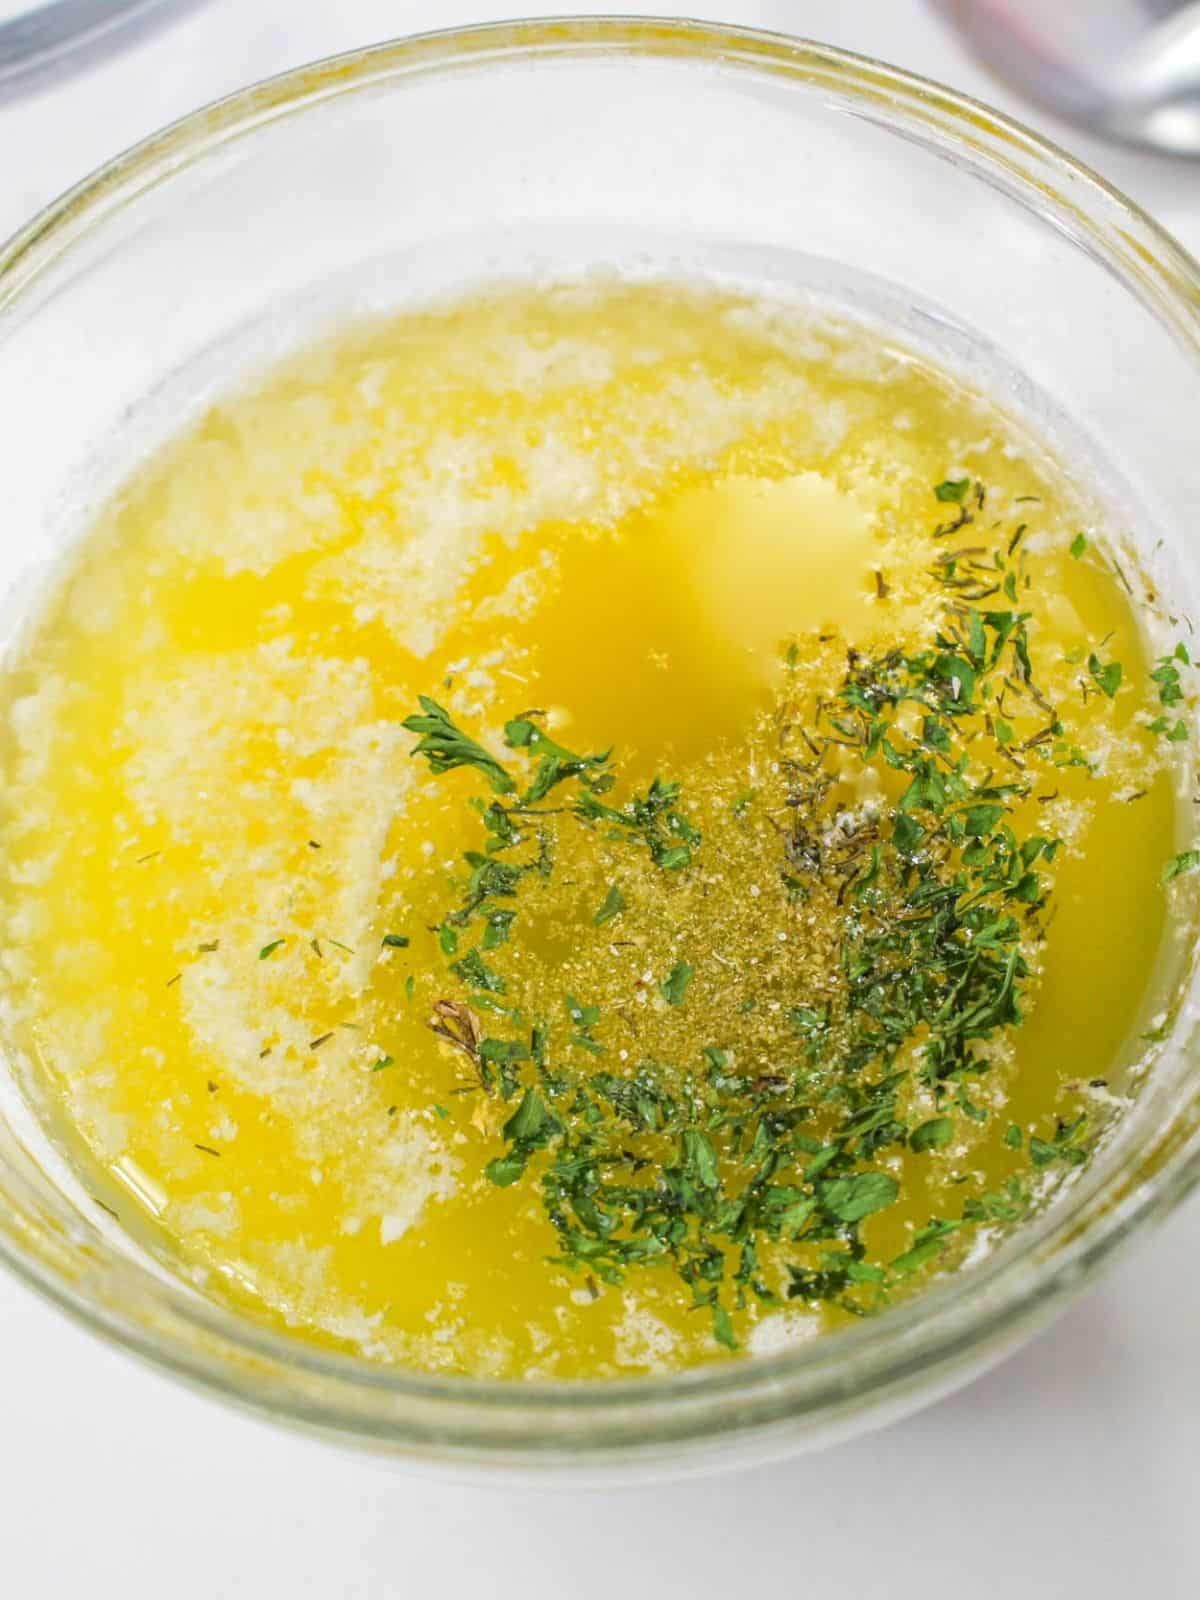 melted butter in glass bowl with spices.